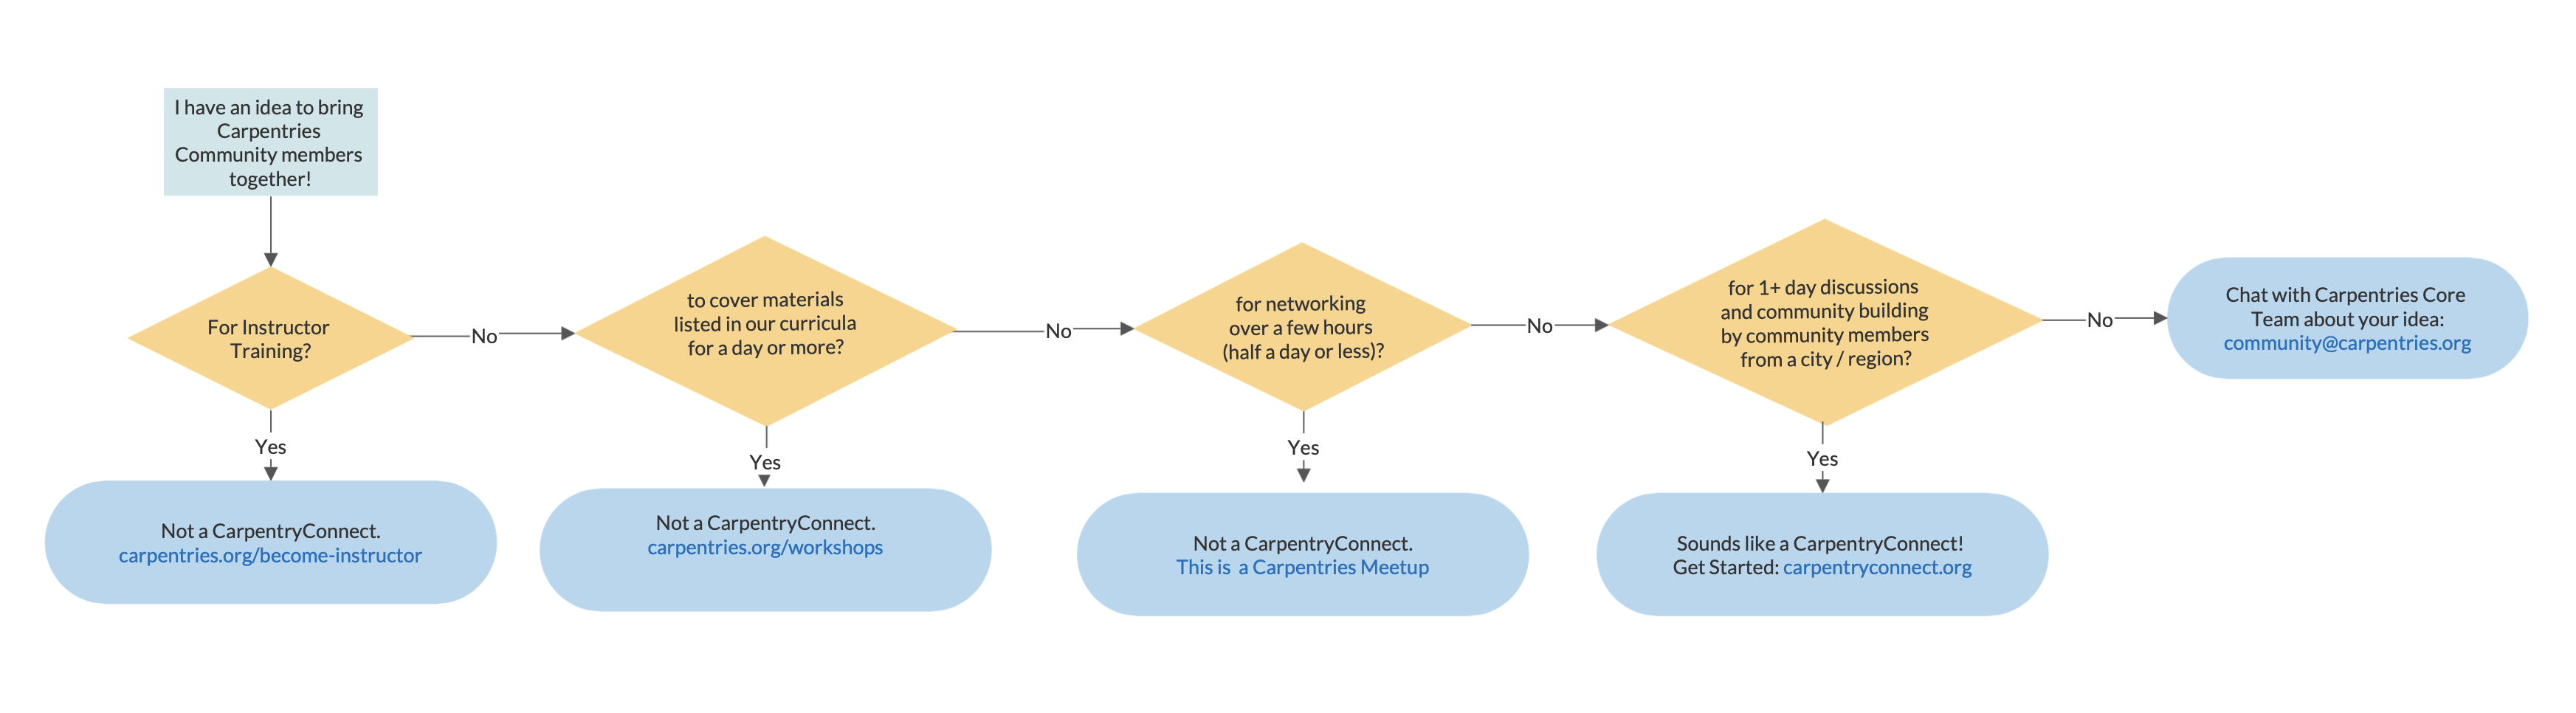 carpentryconnect or not flowchart